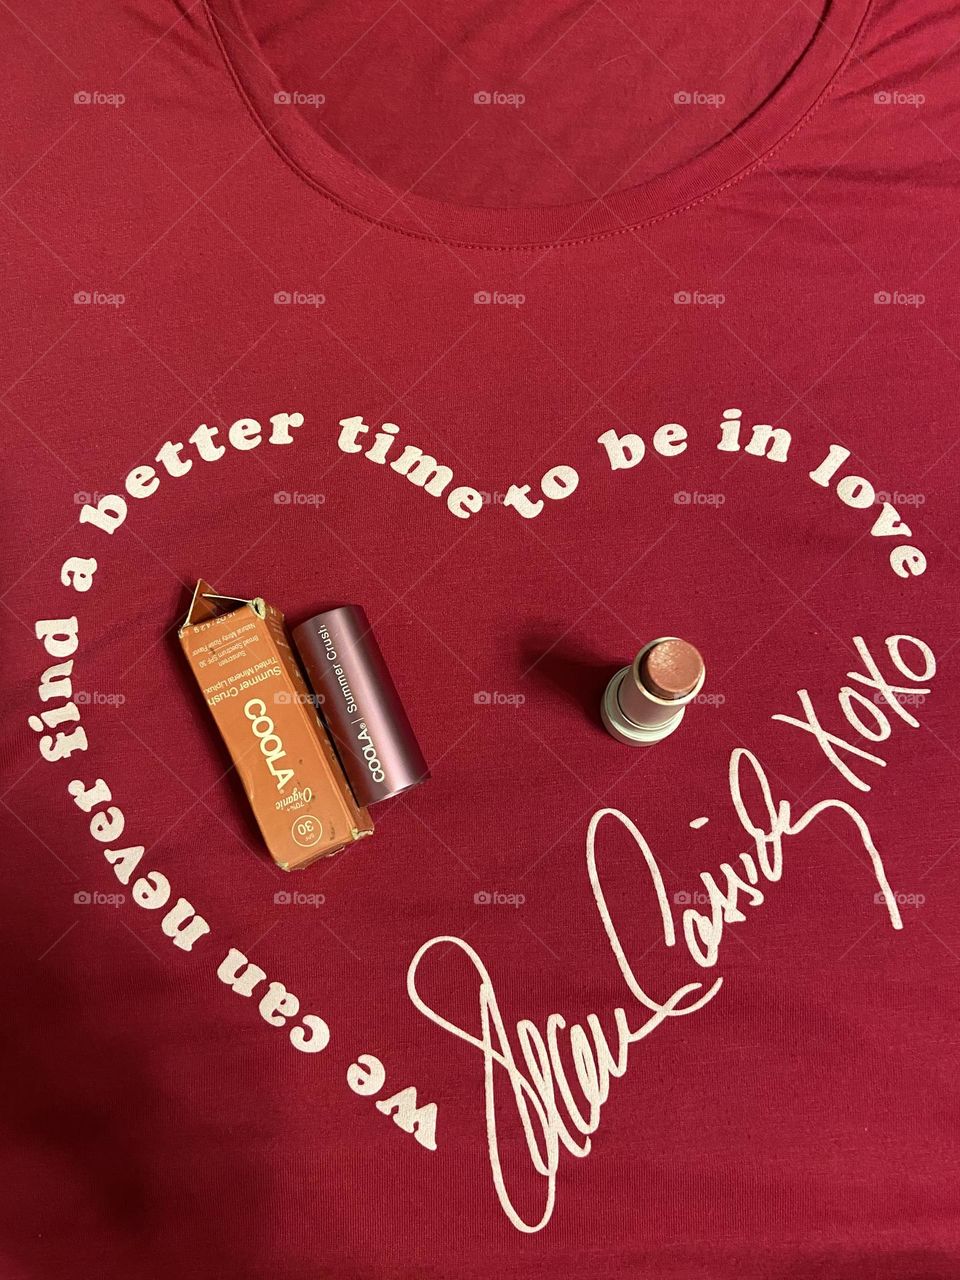 Two of my favorite “crushes”: Coola “Summer Crush”lipstick, a pink shade with SPF30, displayed on a T-shirt I bought at Parx Casino in Philadelphia, PA during a December 2021 concert performance of one of my first crushes, Mr. Shaun Cassidy. 